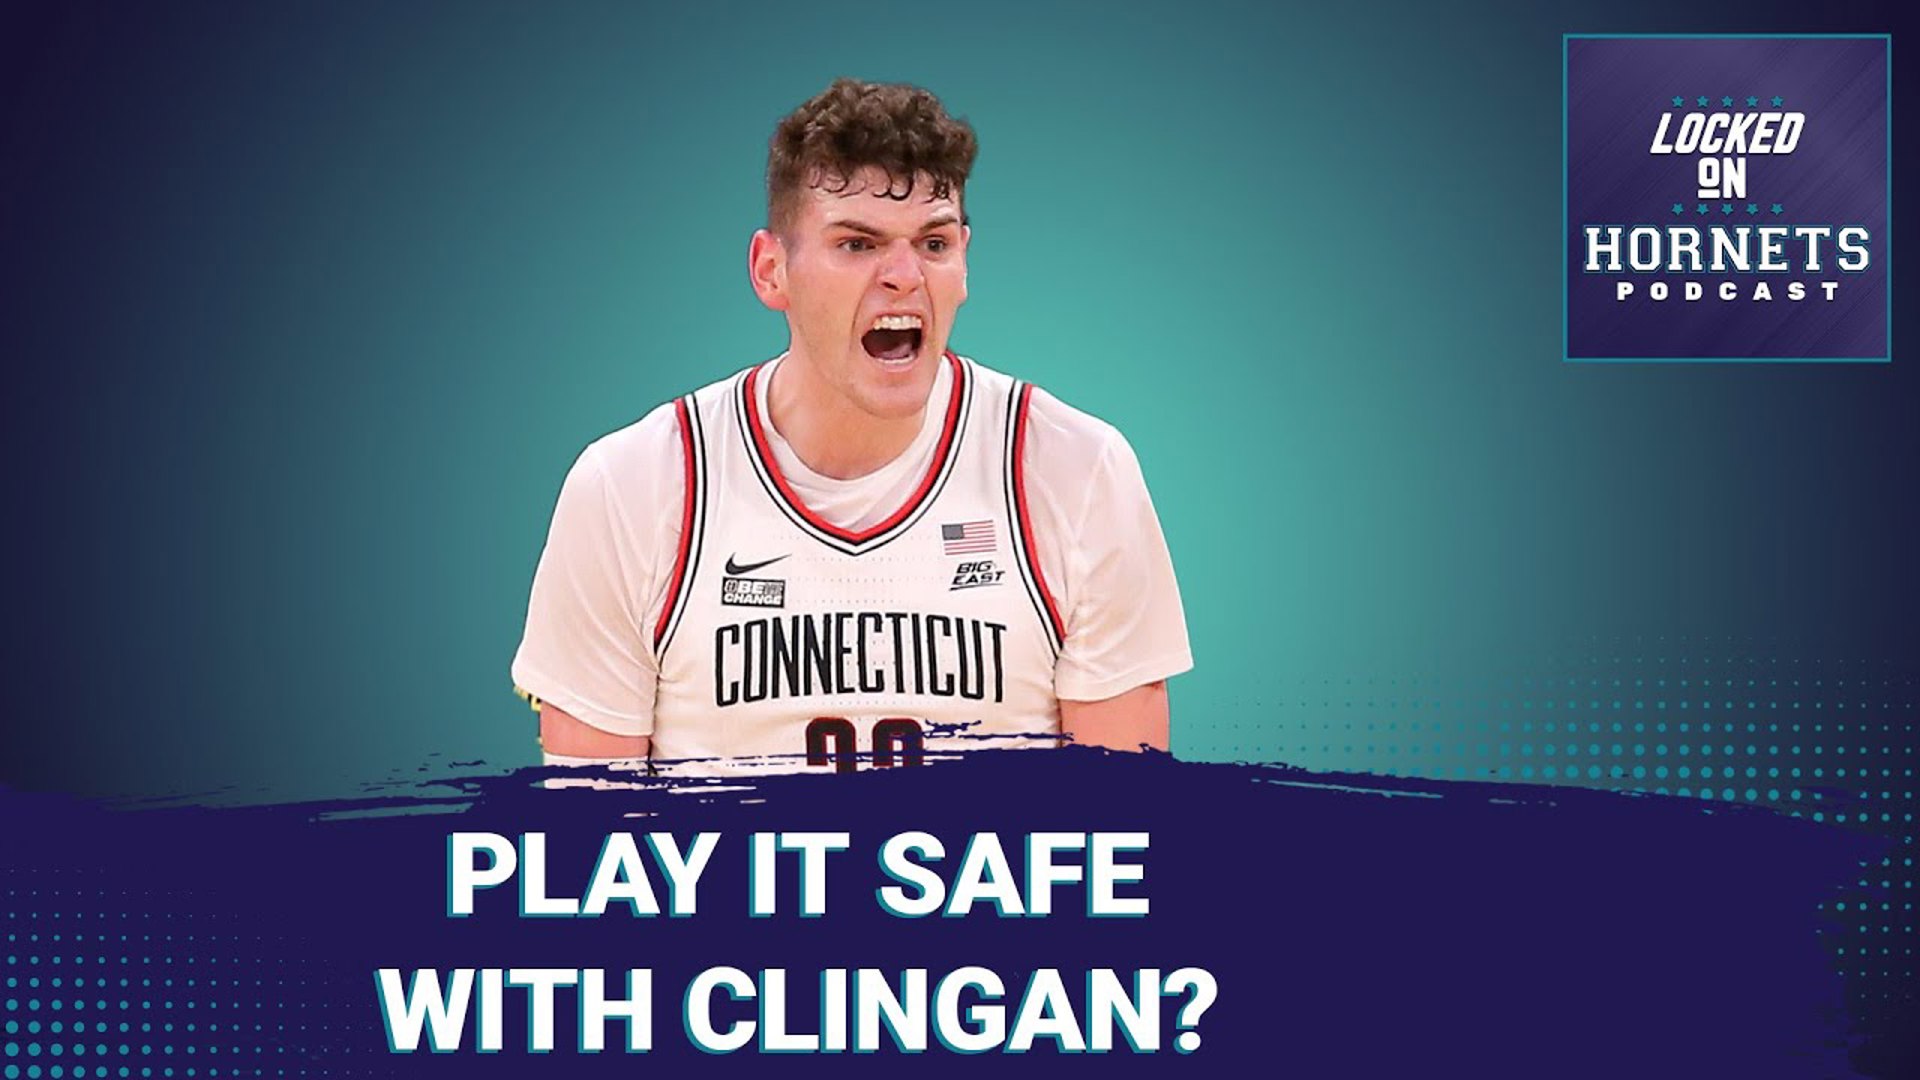 NBA Draft Scouting Play it safe with Clingan, Hot prospects if the